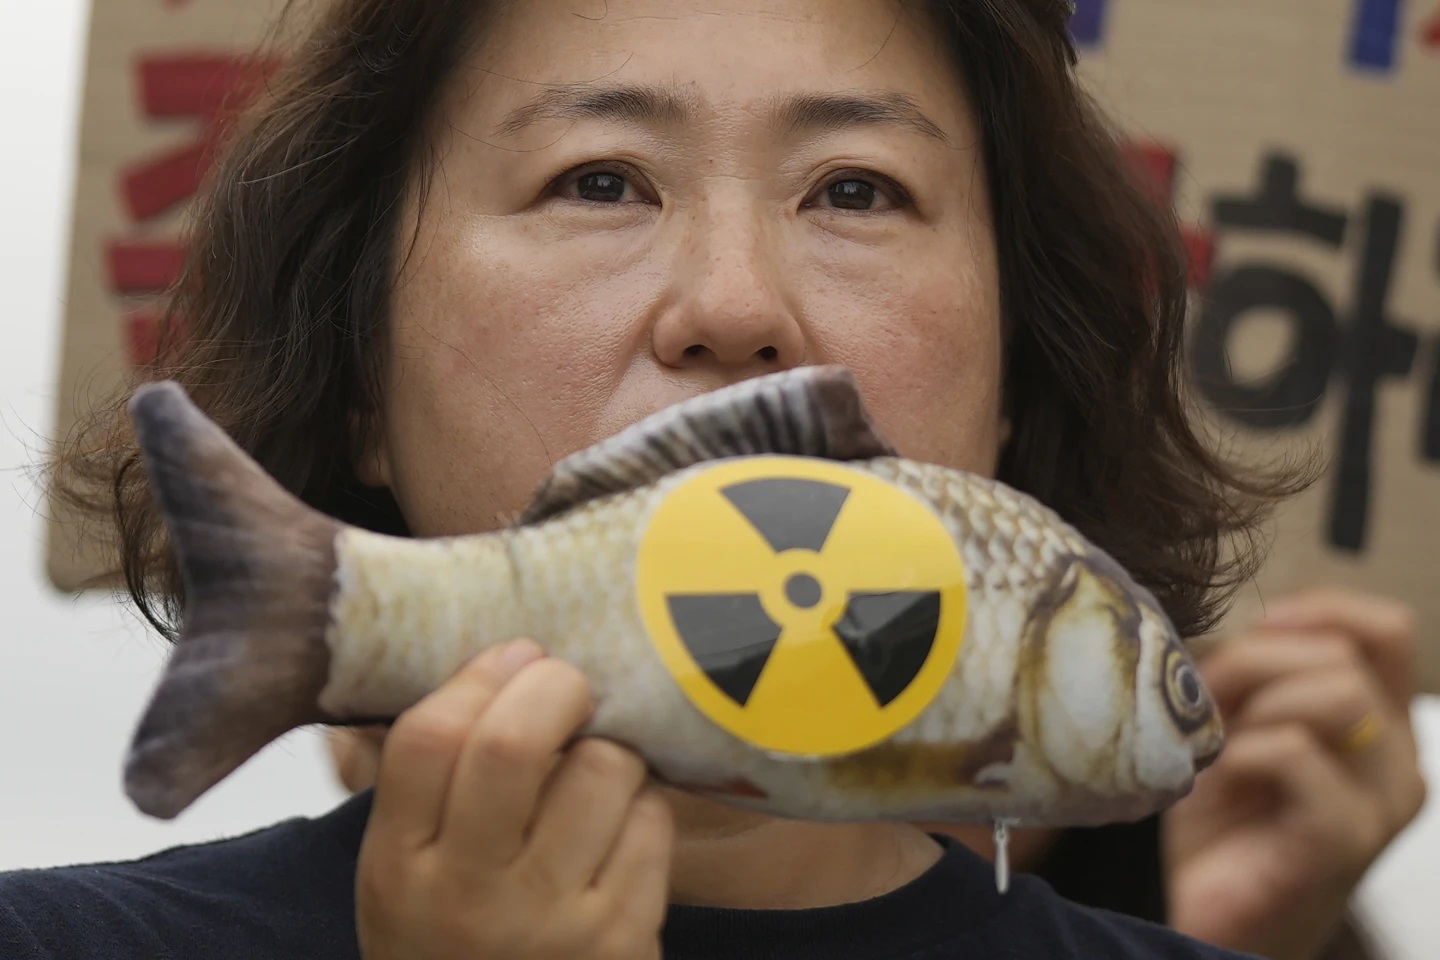 In Japan’s neighbors, fear and frustration are shared over radioactive water release